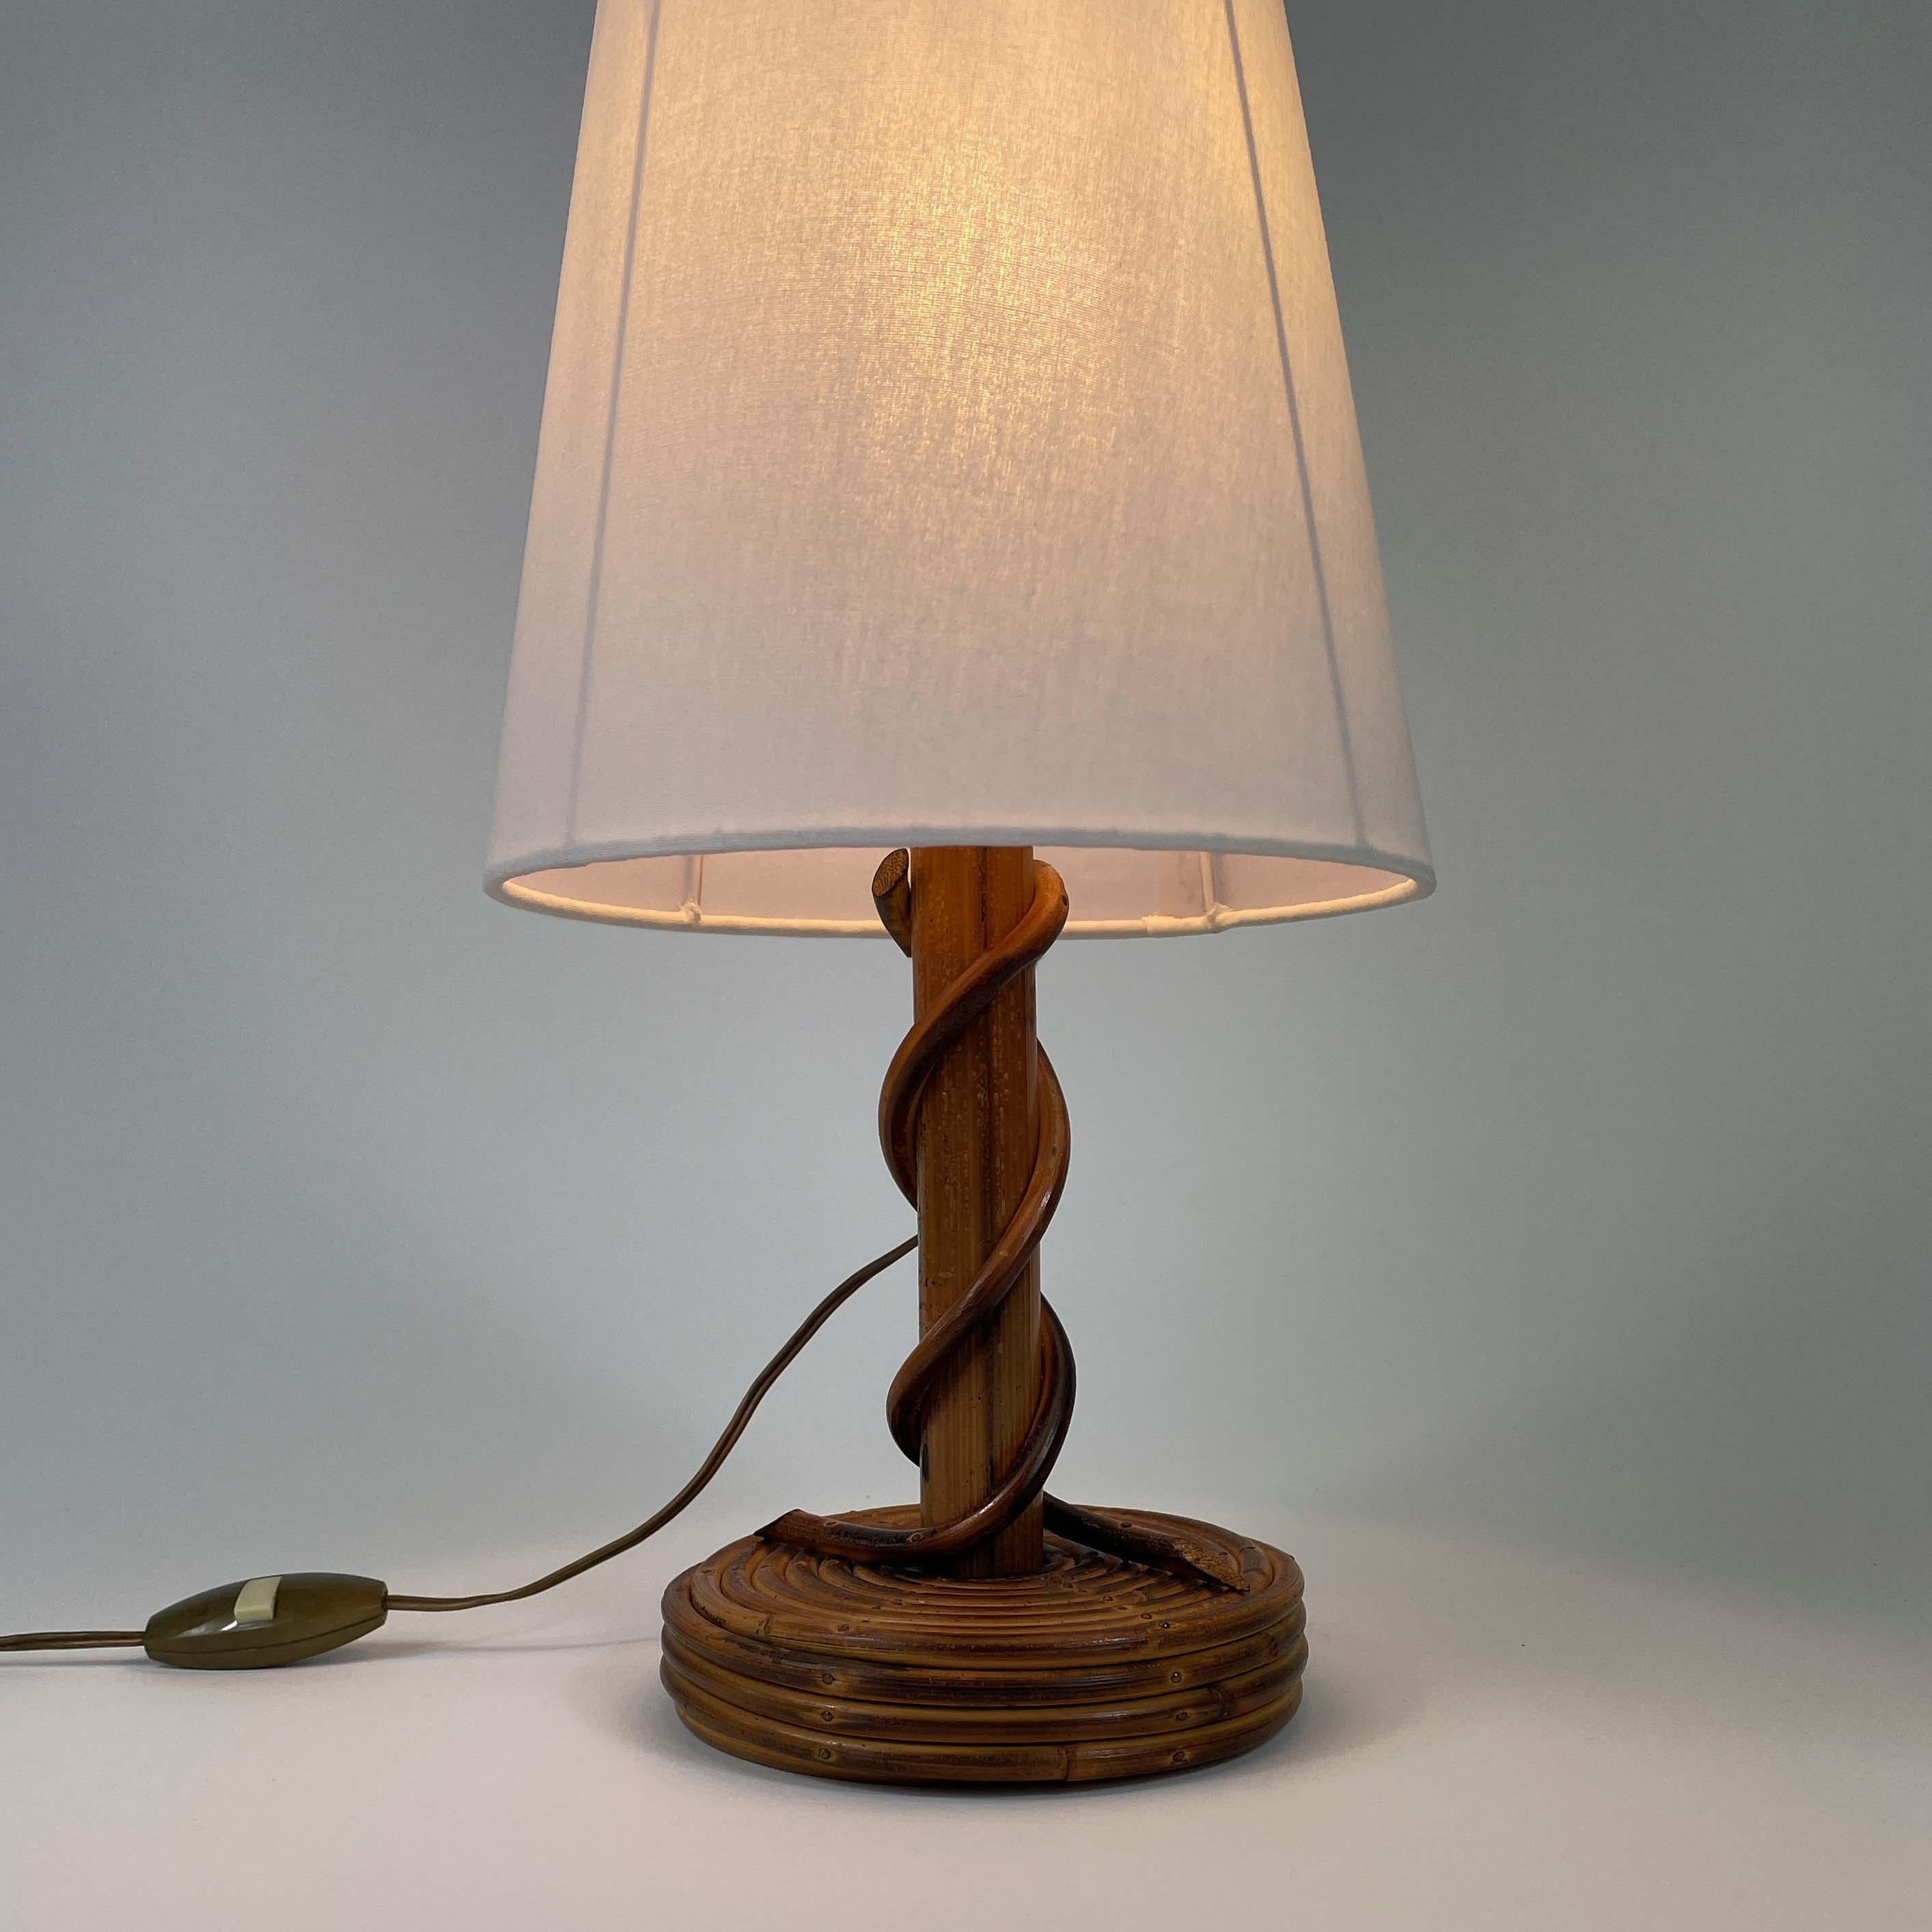 French Louis SOGNOT Rattan Bamboo Fabric Table Lamp, France 1950s For Sale